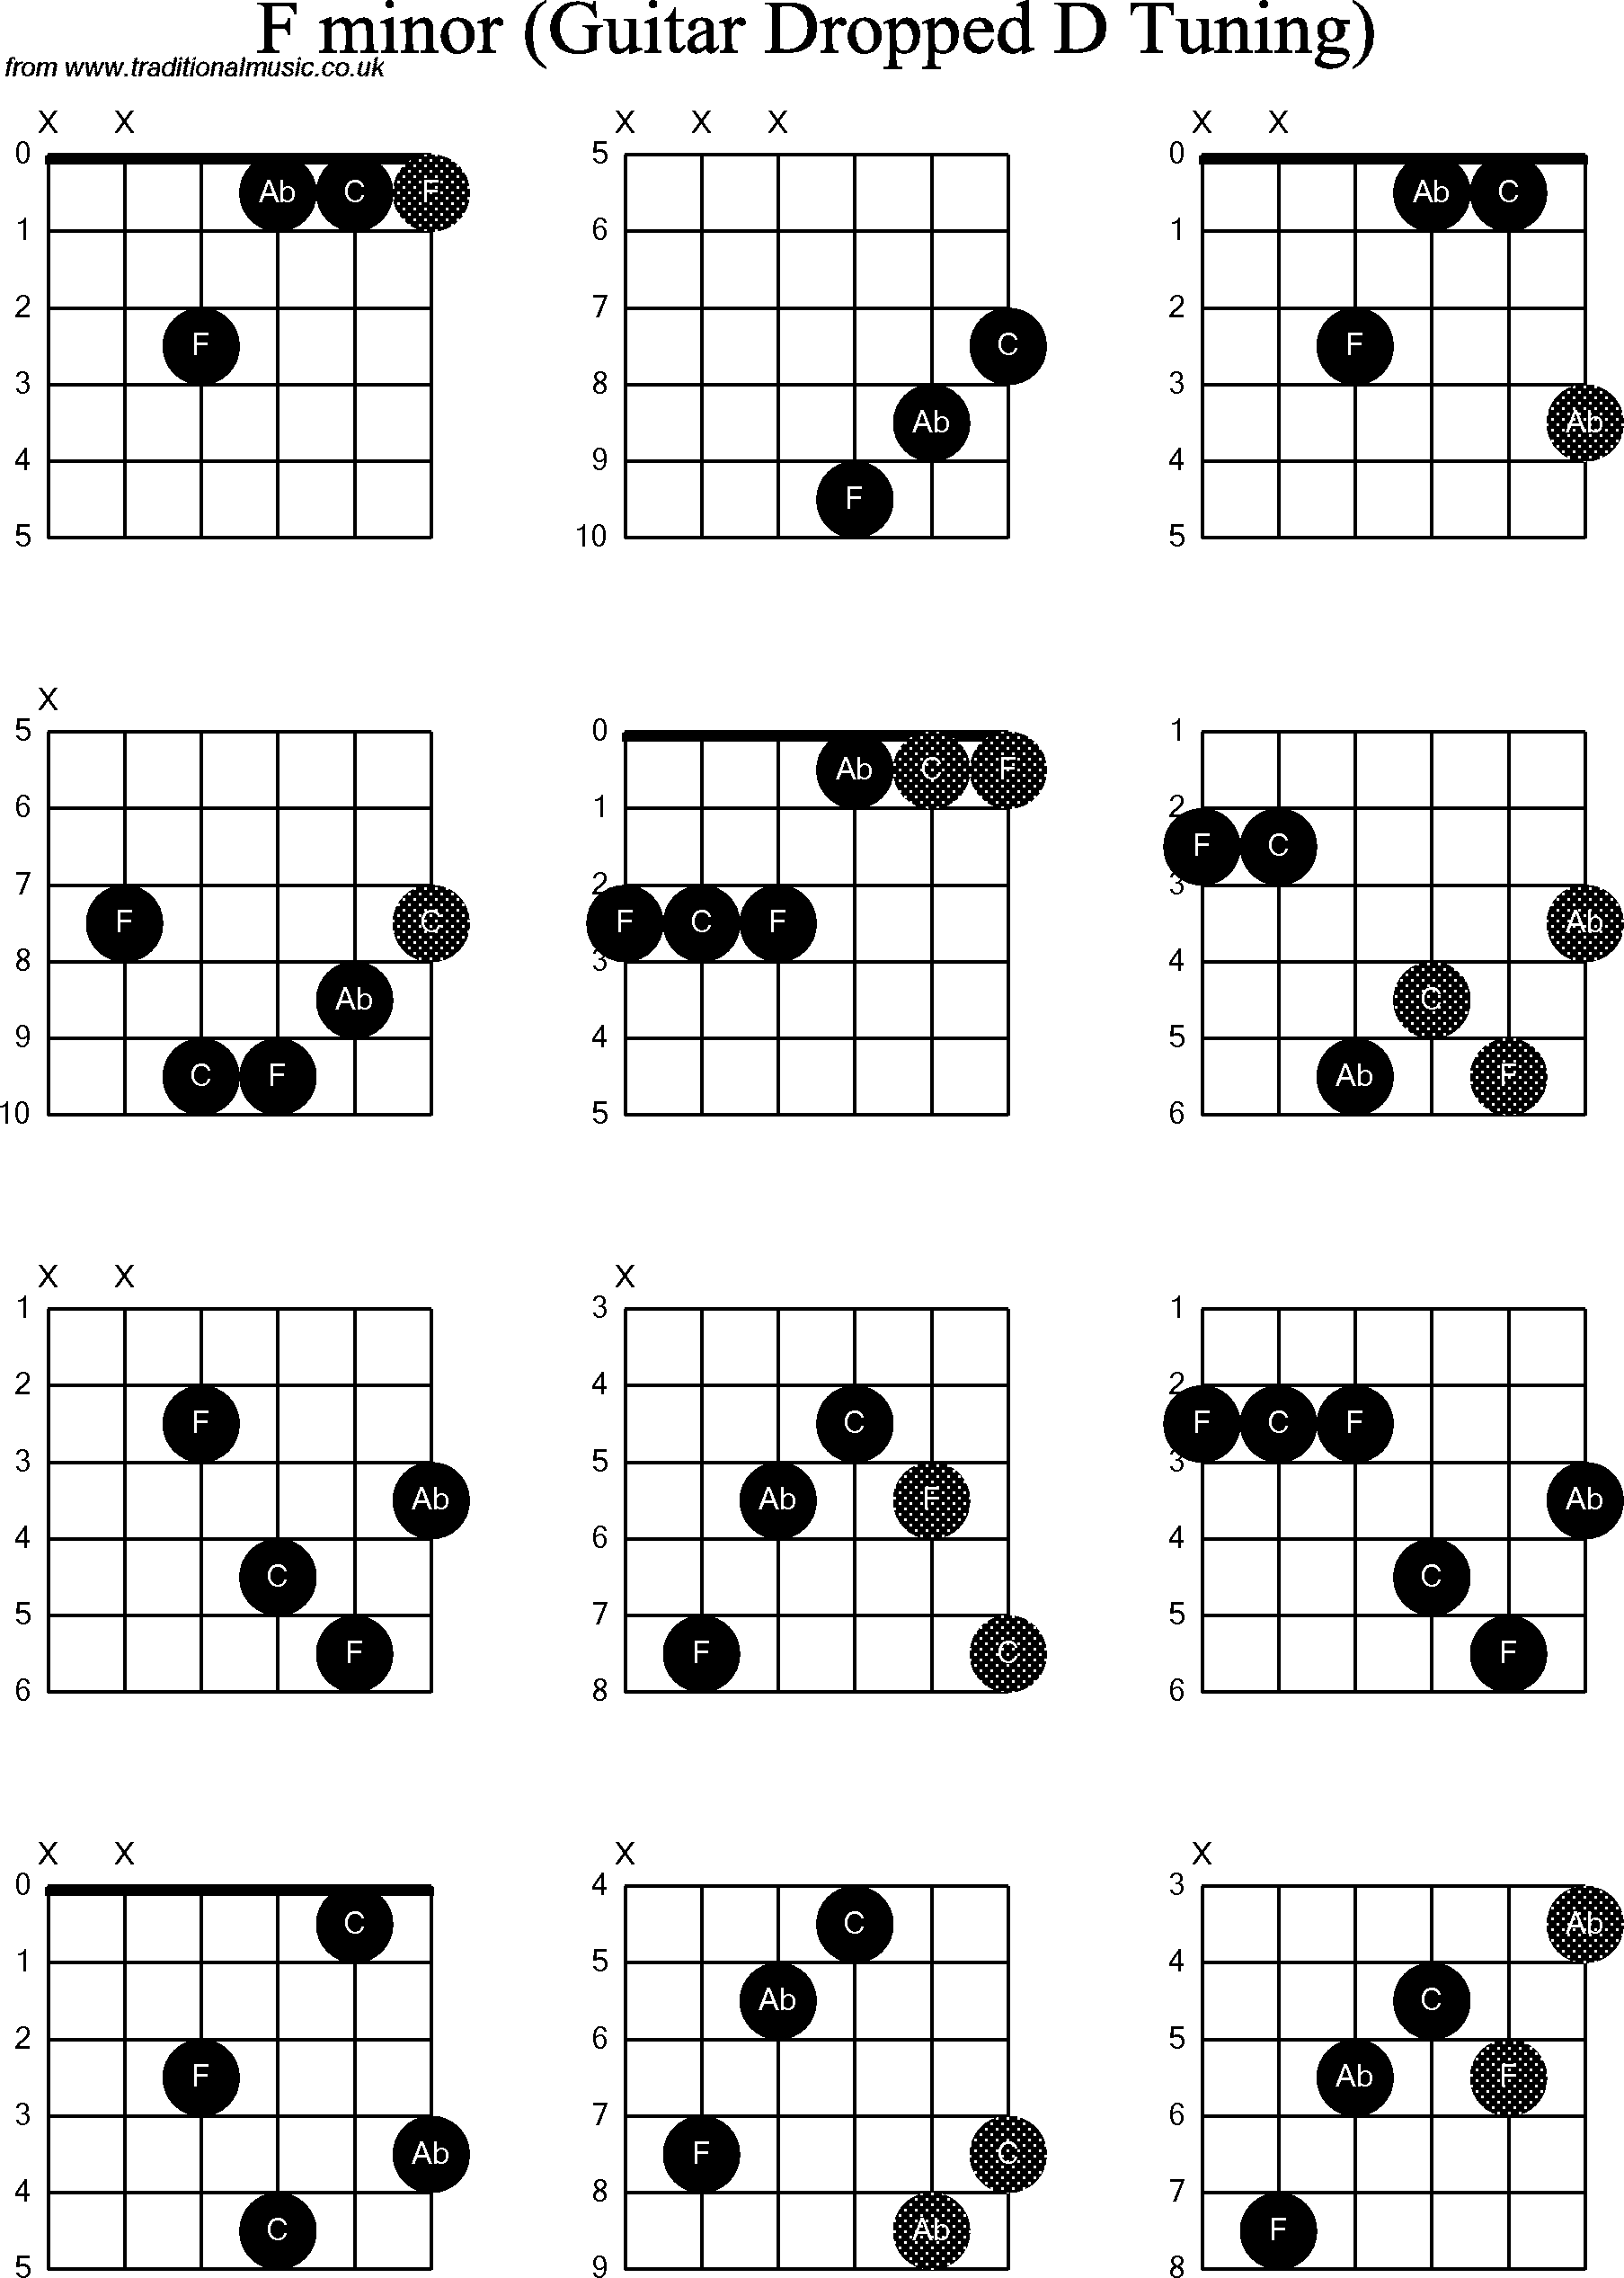 Chord diagrams for dropped D Guitar(DADGBE), F Minor